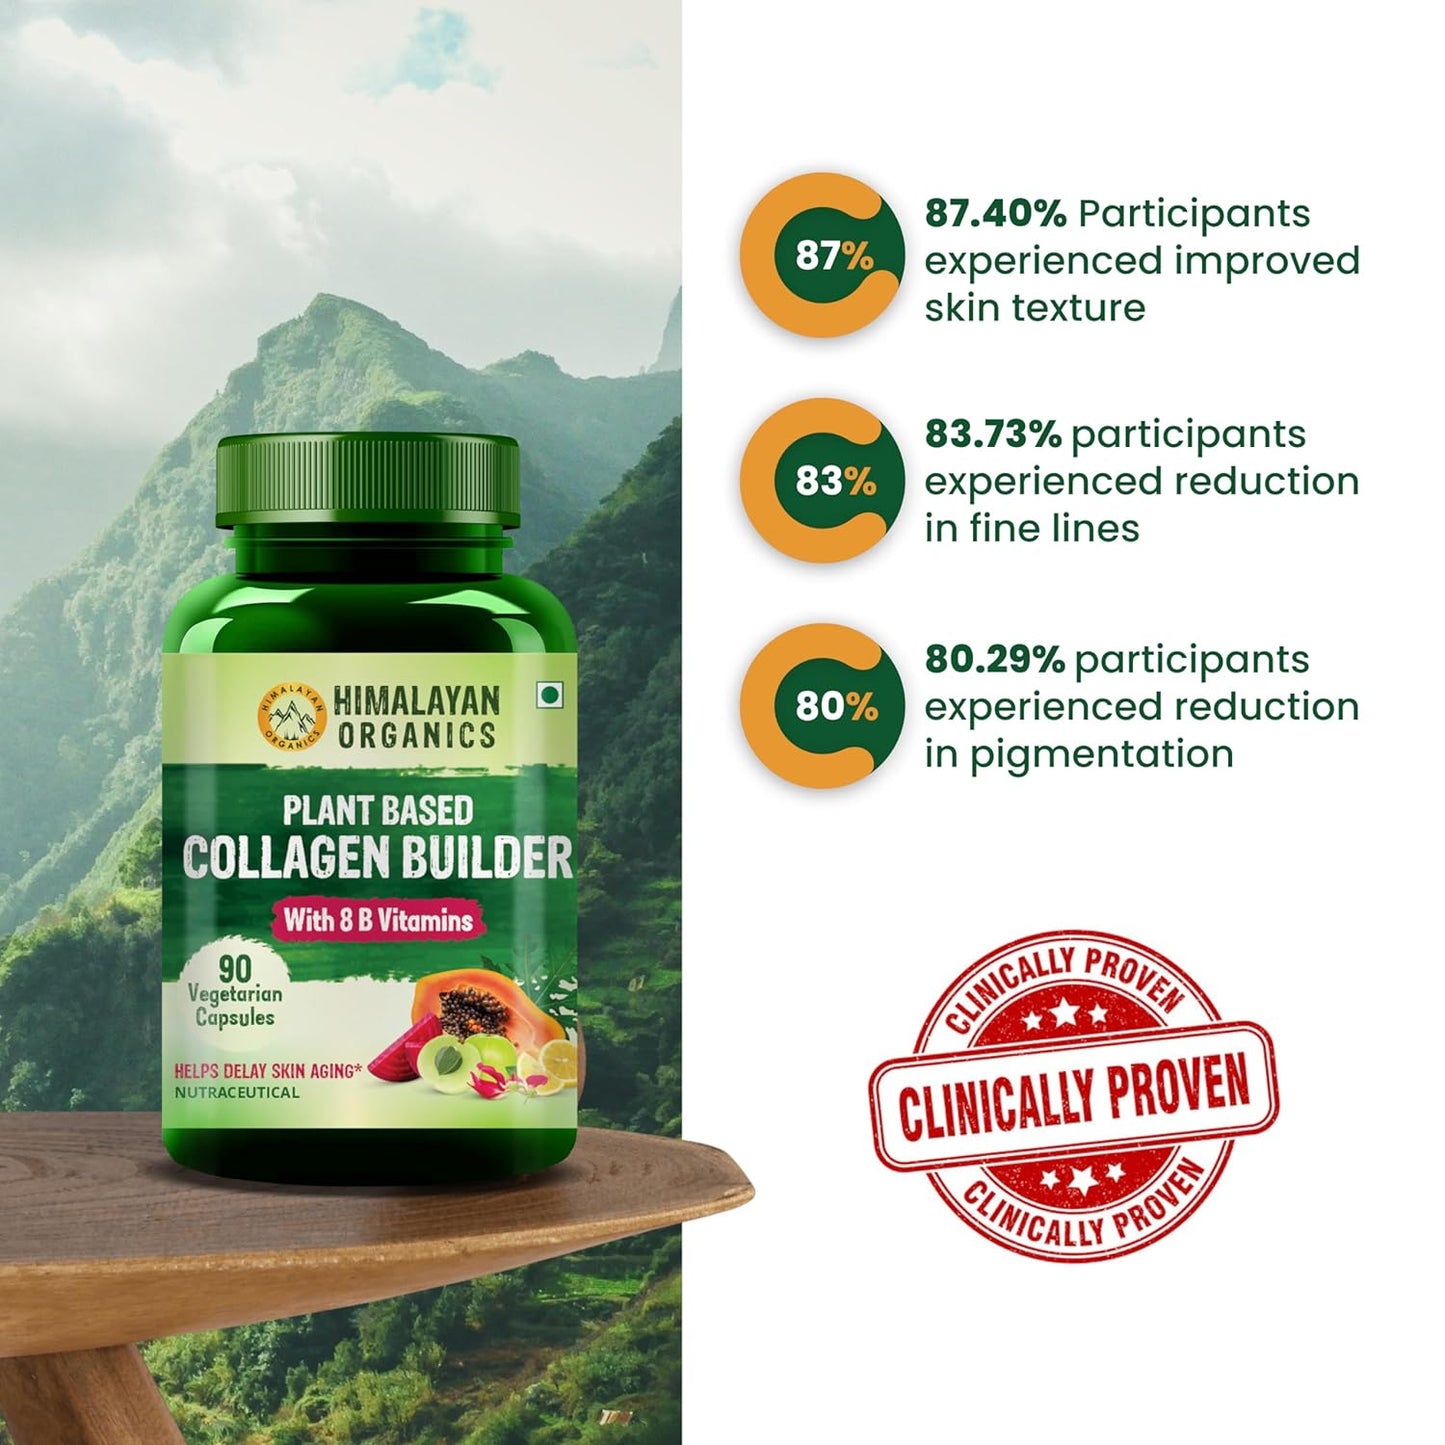 Himalayan Organics Plant Based Collagen Builder With 8 B Vitamins for Hair and Skin | Collagen Supplement for Women & Men | Collagen Capsules With Biotin & Vitamin C | Glowing and Youthful Skin (90 Capsules)